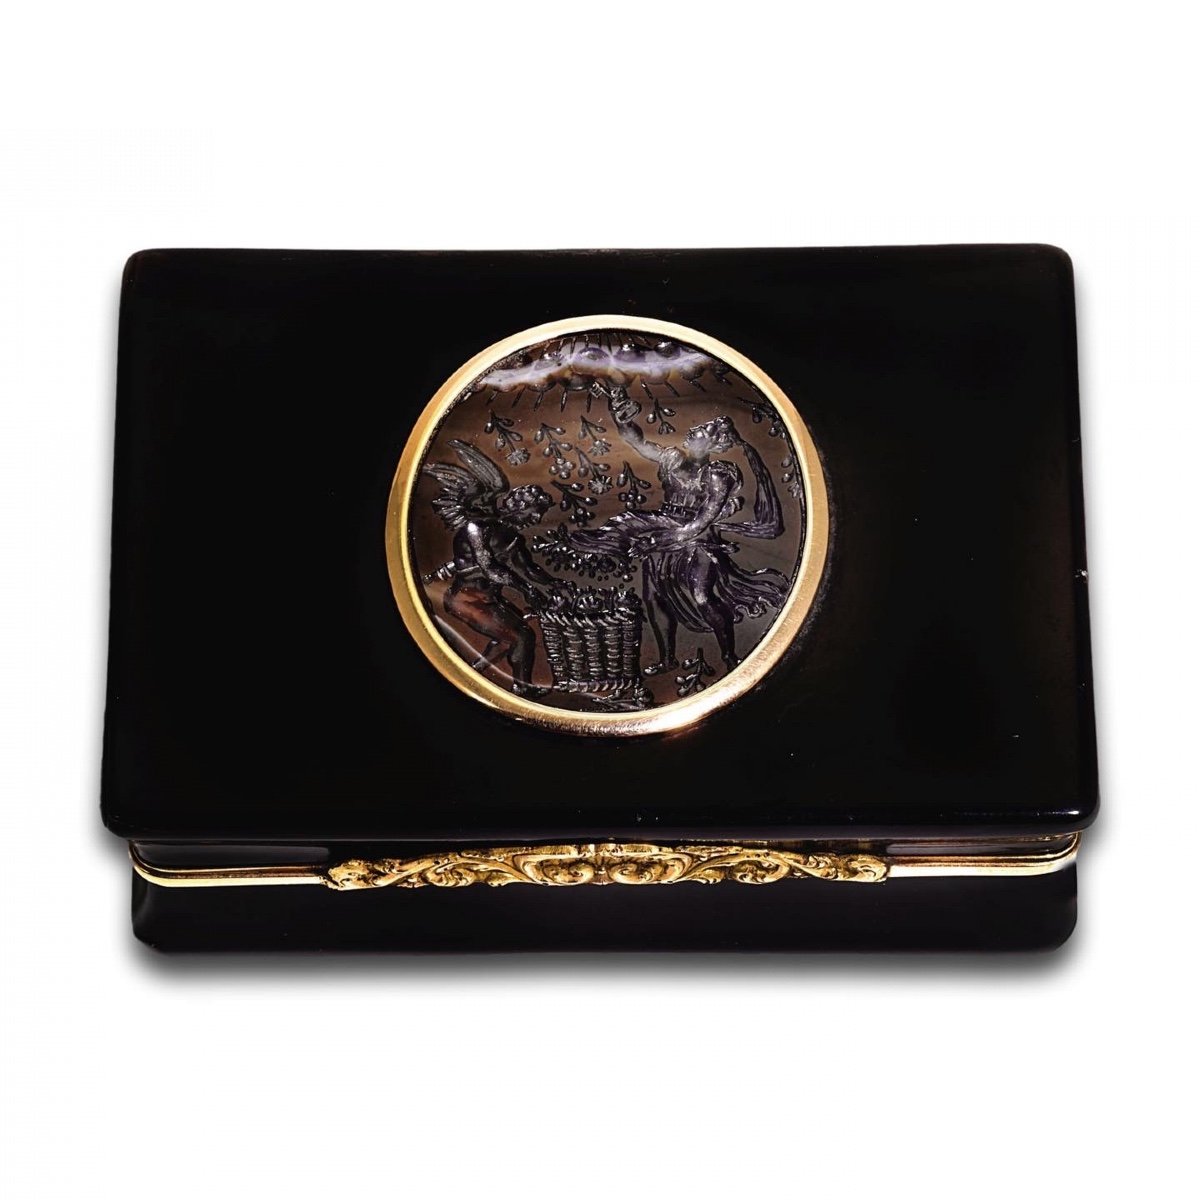 Gold And Tortoiseshell Snuff Box With An Agate Intaglio. English, 19th Century.